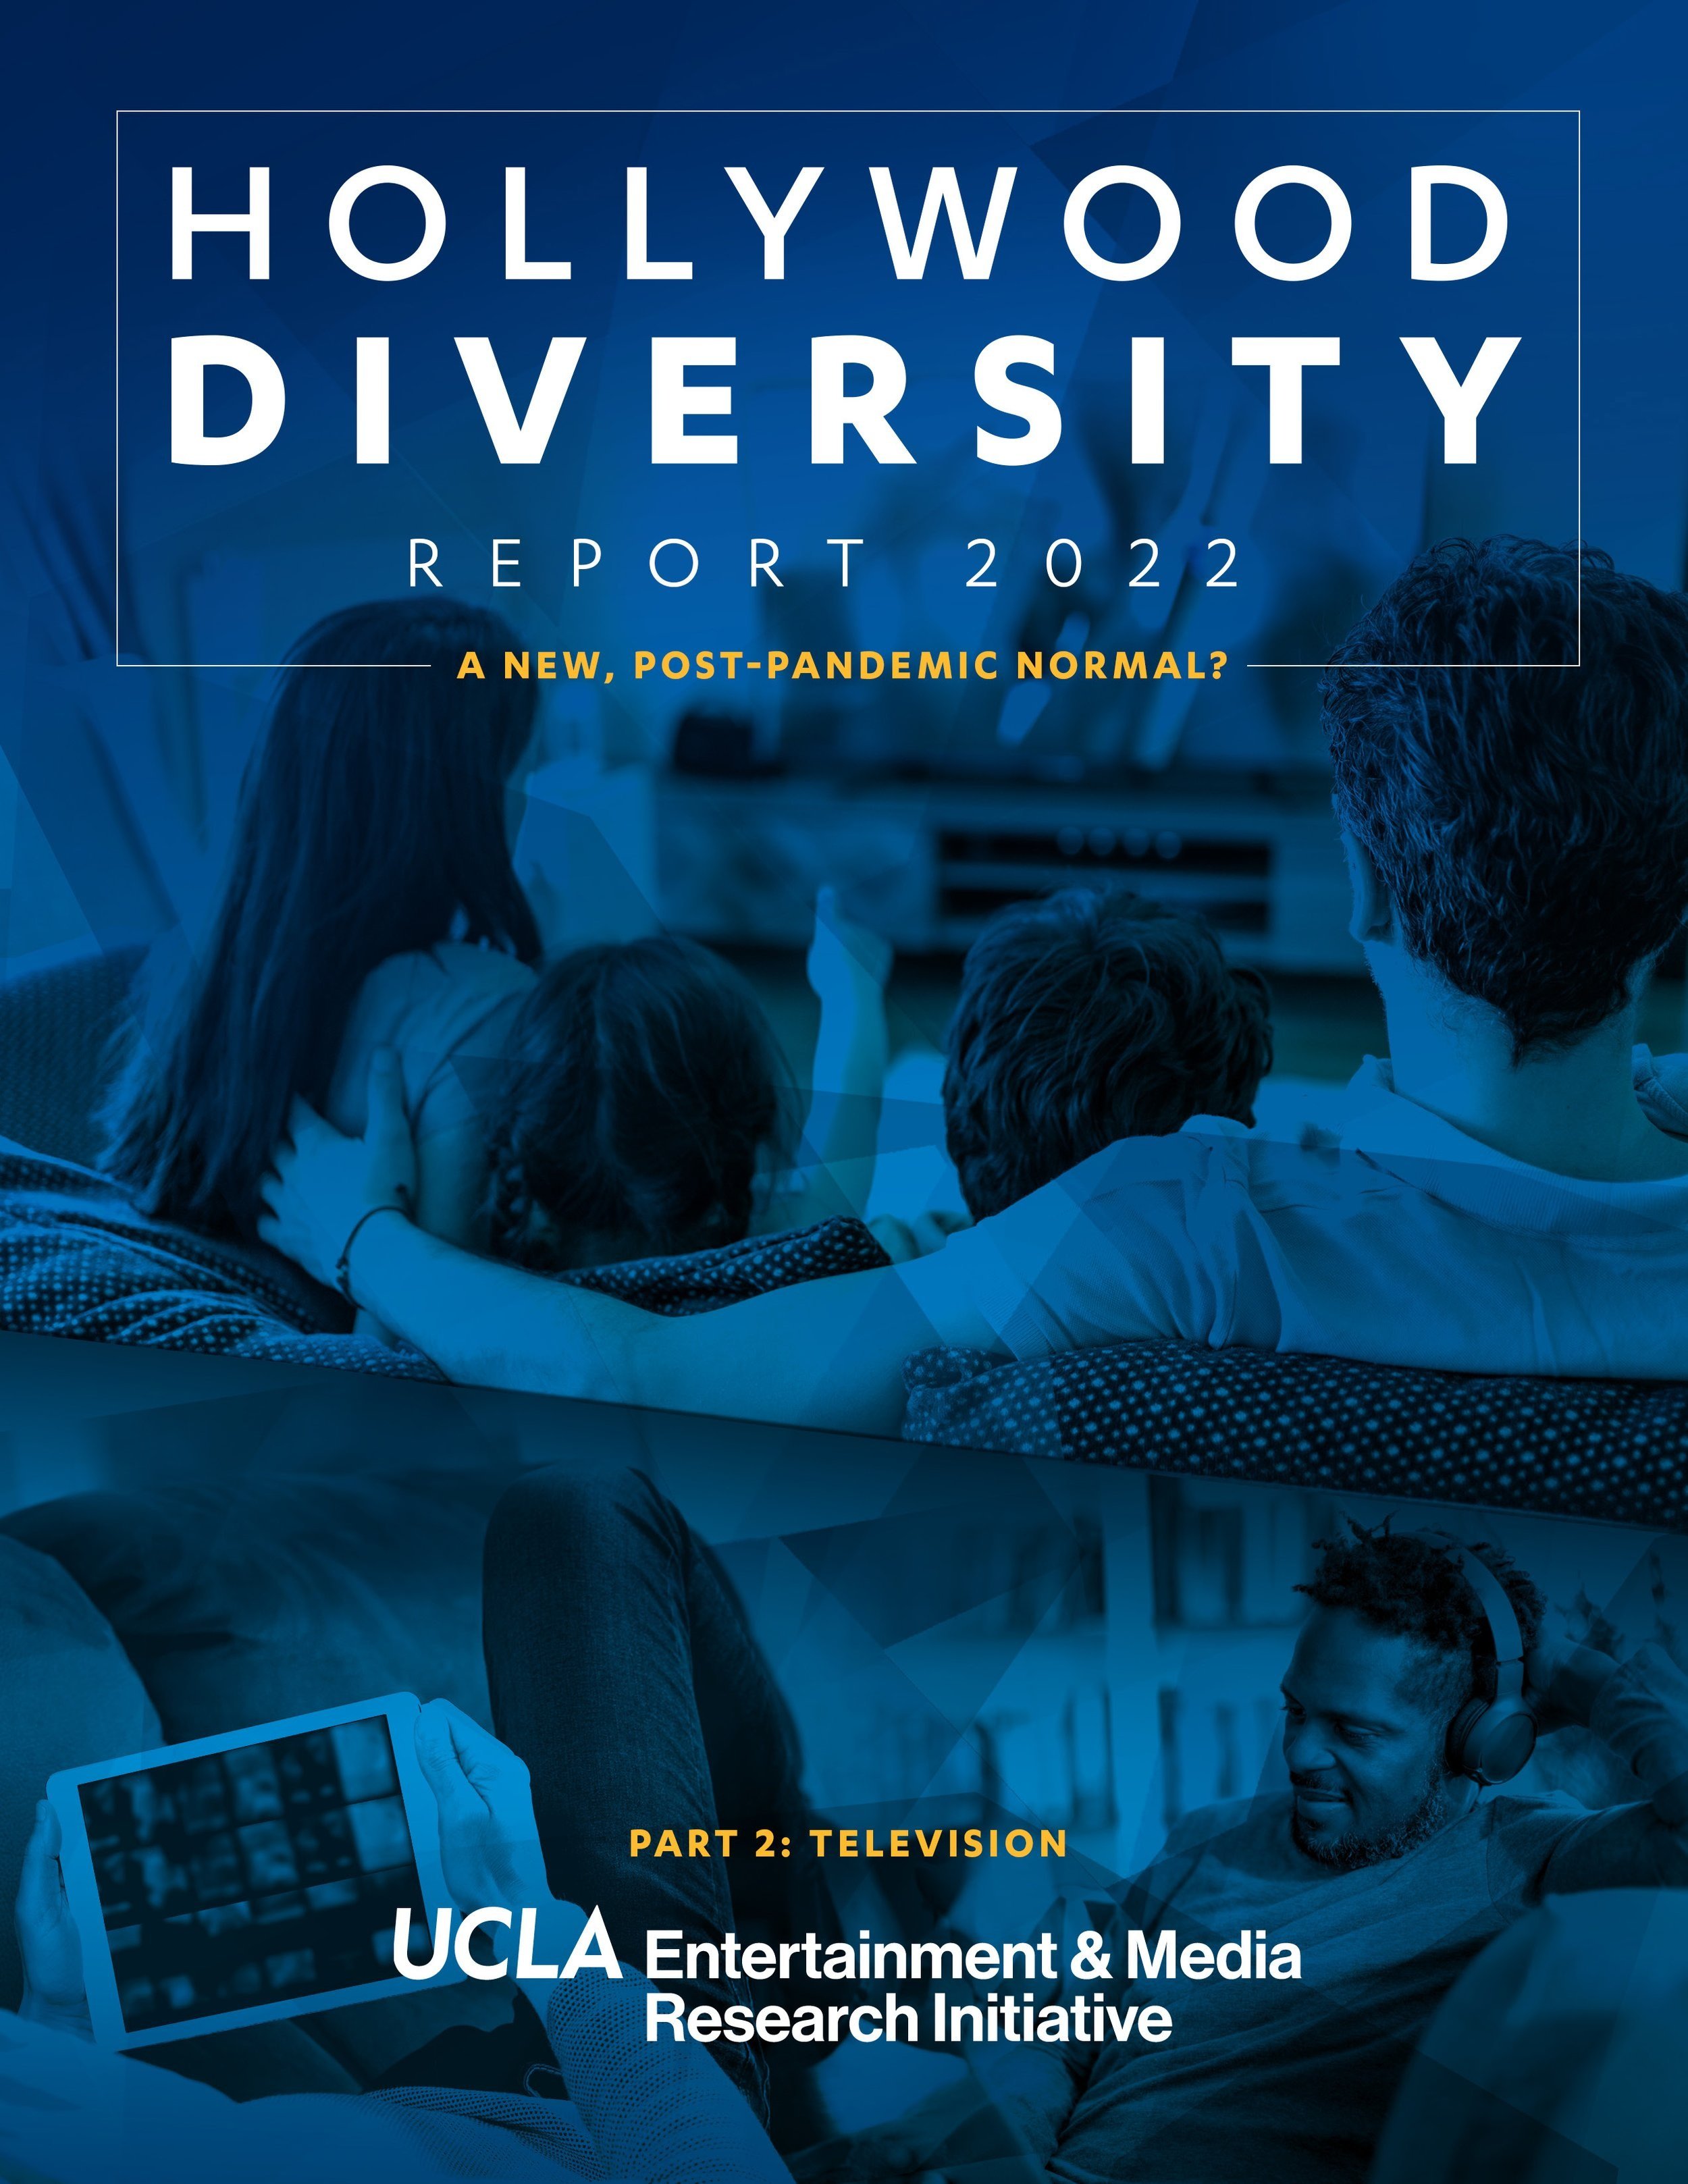 UCLA-Hollywood-Diversity-Report-2022-Television-10-27-2022+-+COVER.jpg